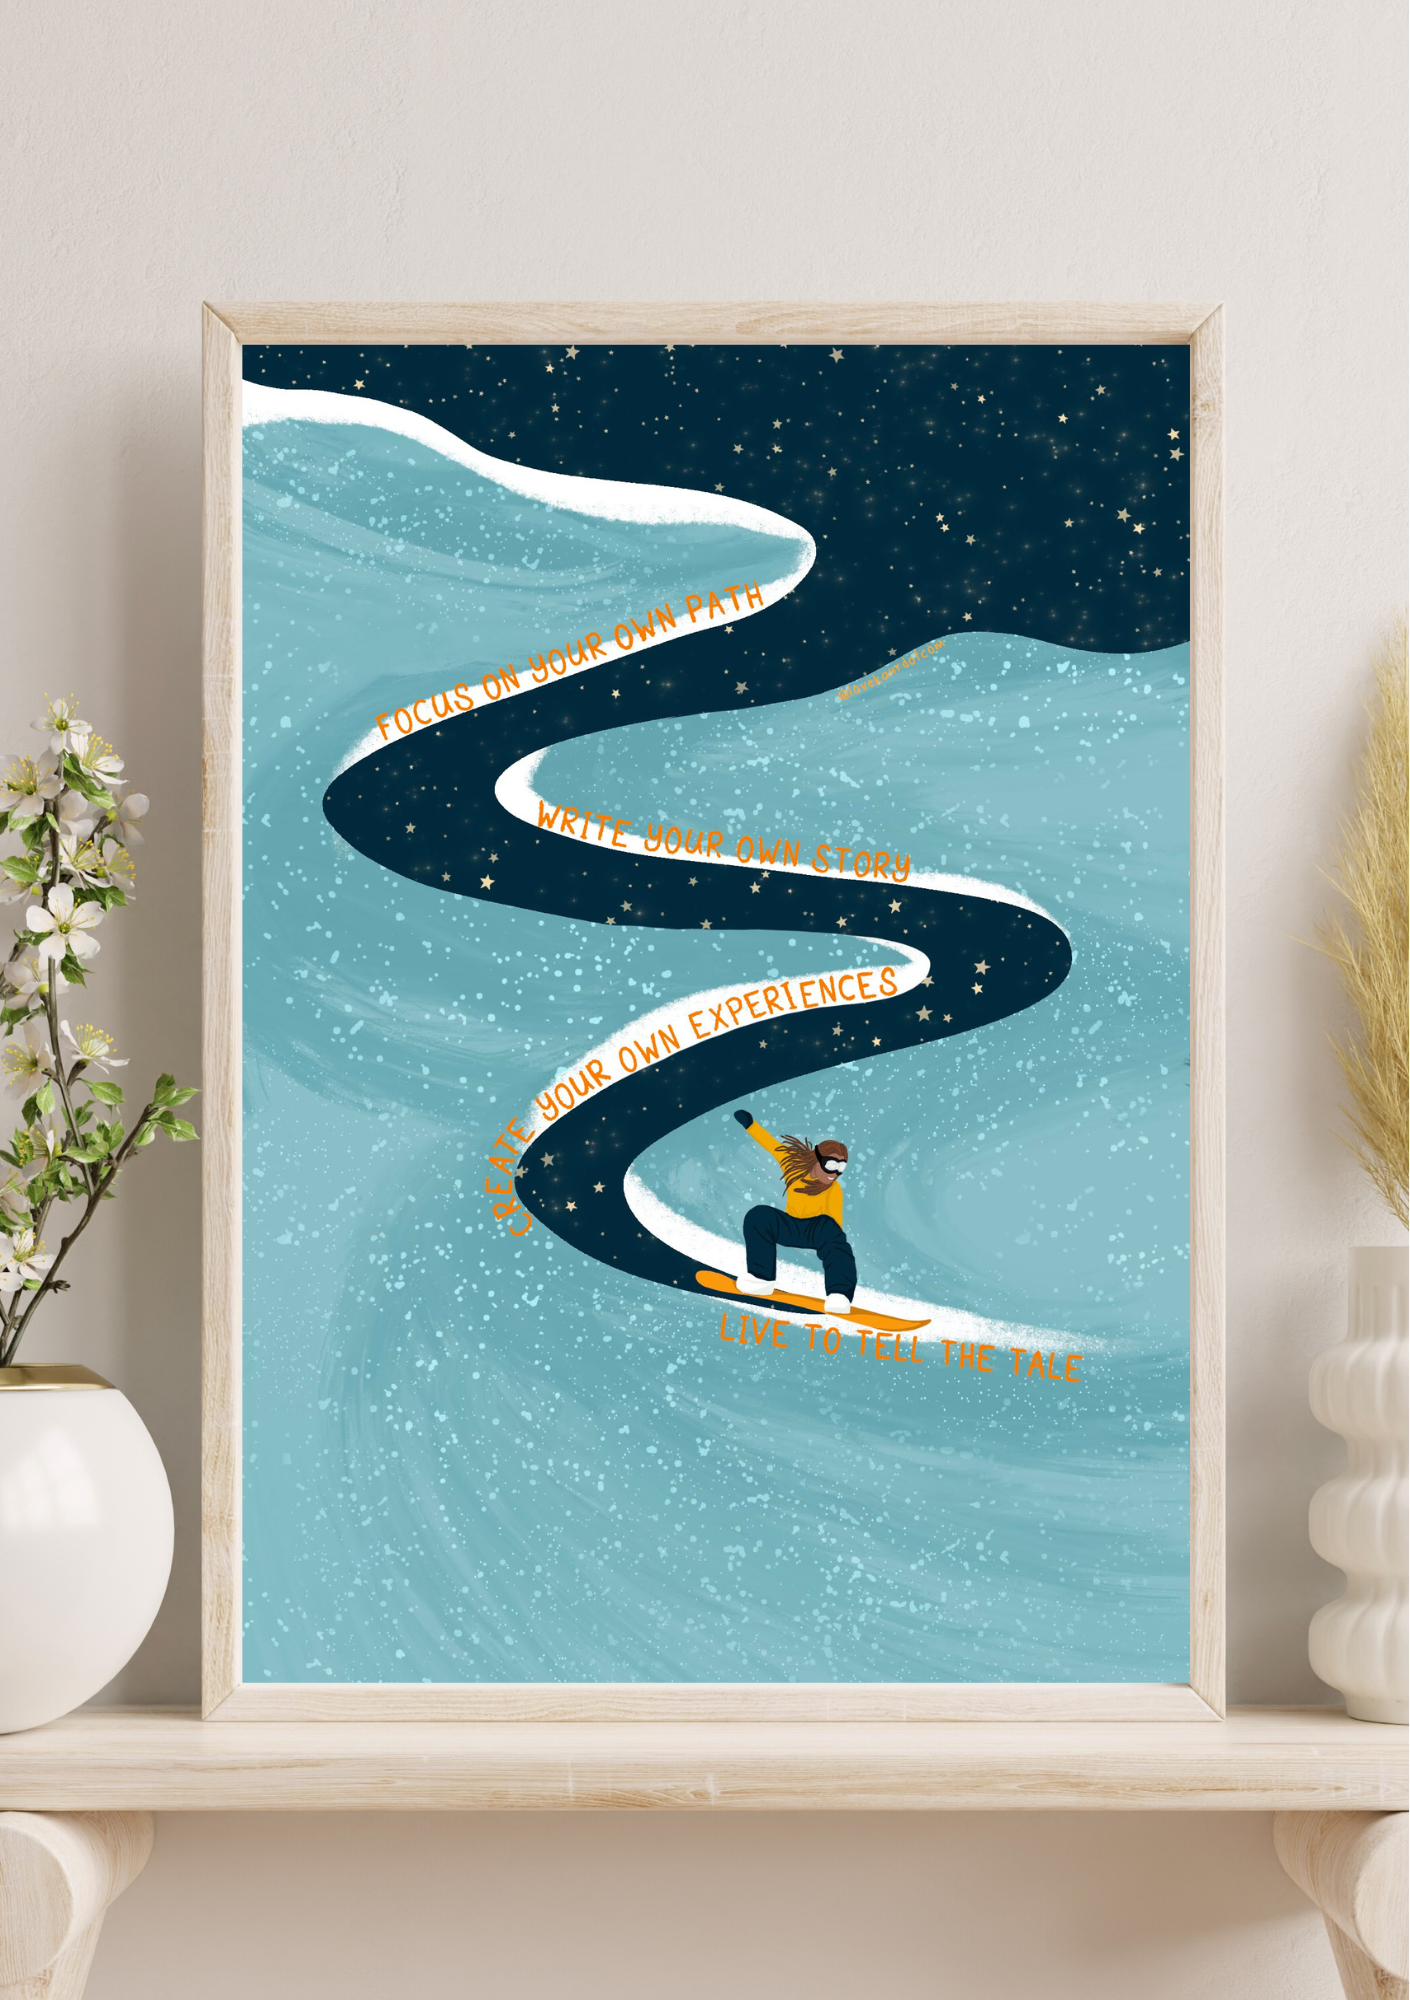 Focus On Your Own Path - A4 Print